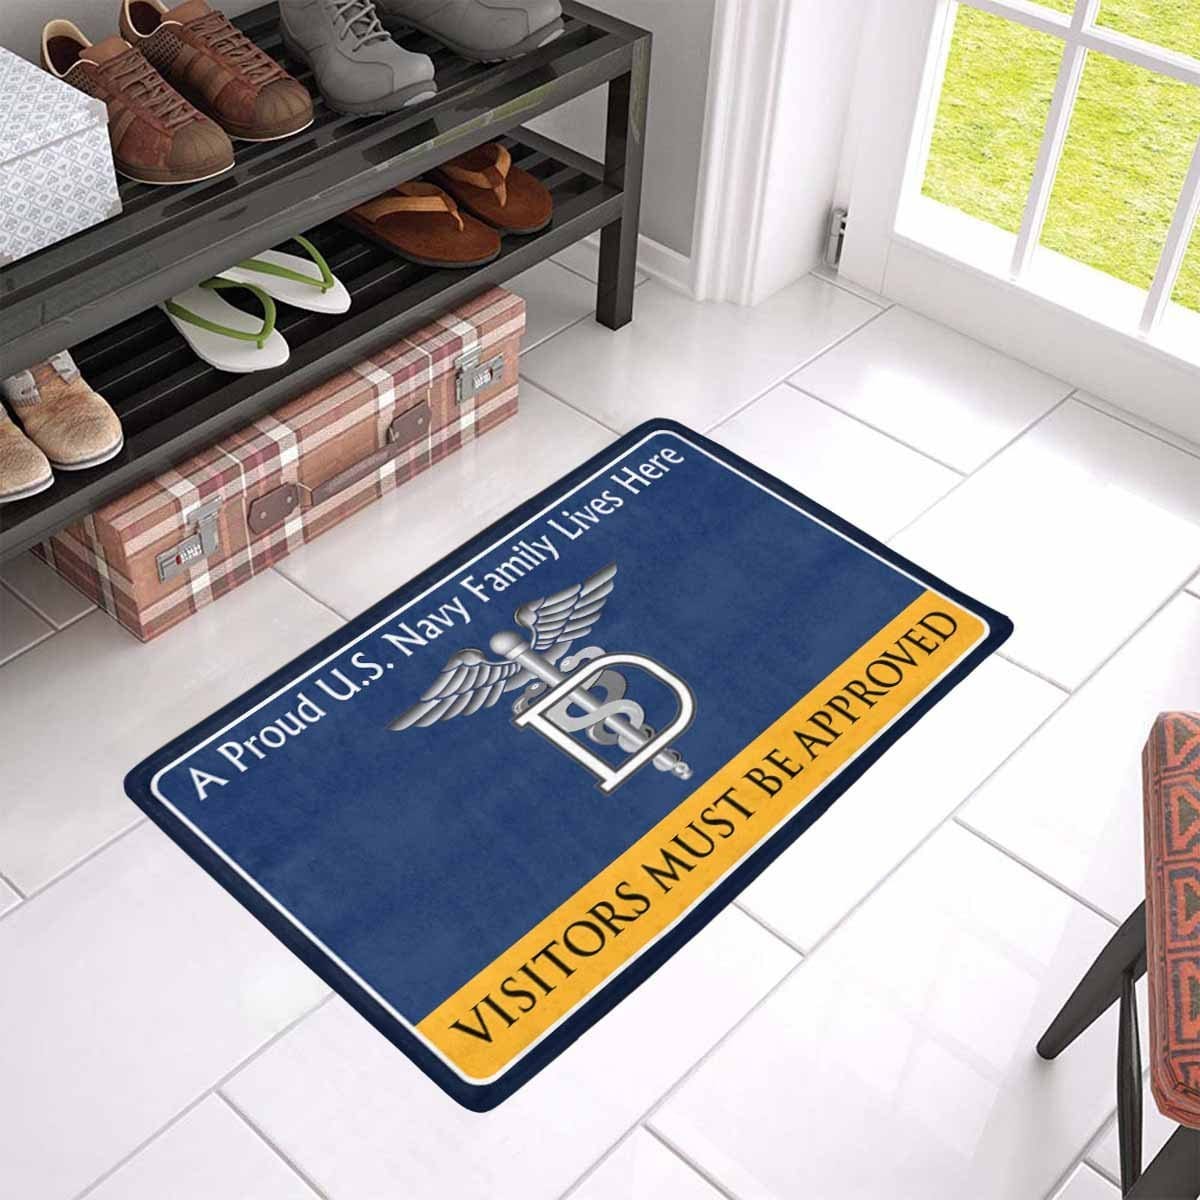 Navy Dental Technician Navy DT Family Doormat - Visitors must be approved (23,6 inches x 15,7 inches)-Doormat-Navy-Rate-Veterans Nation